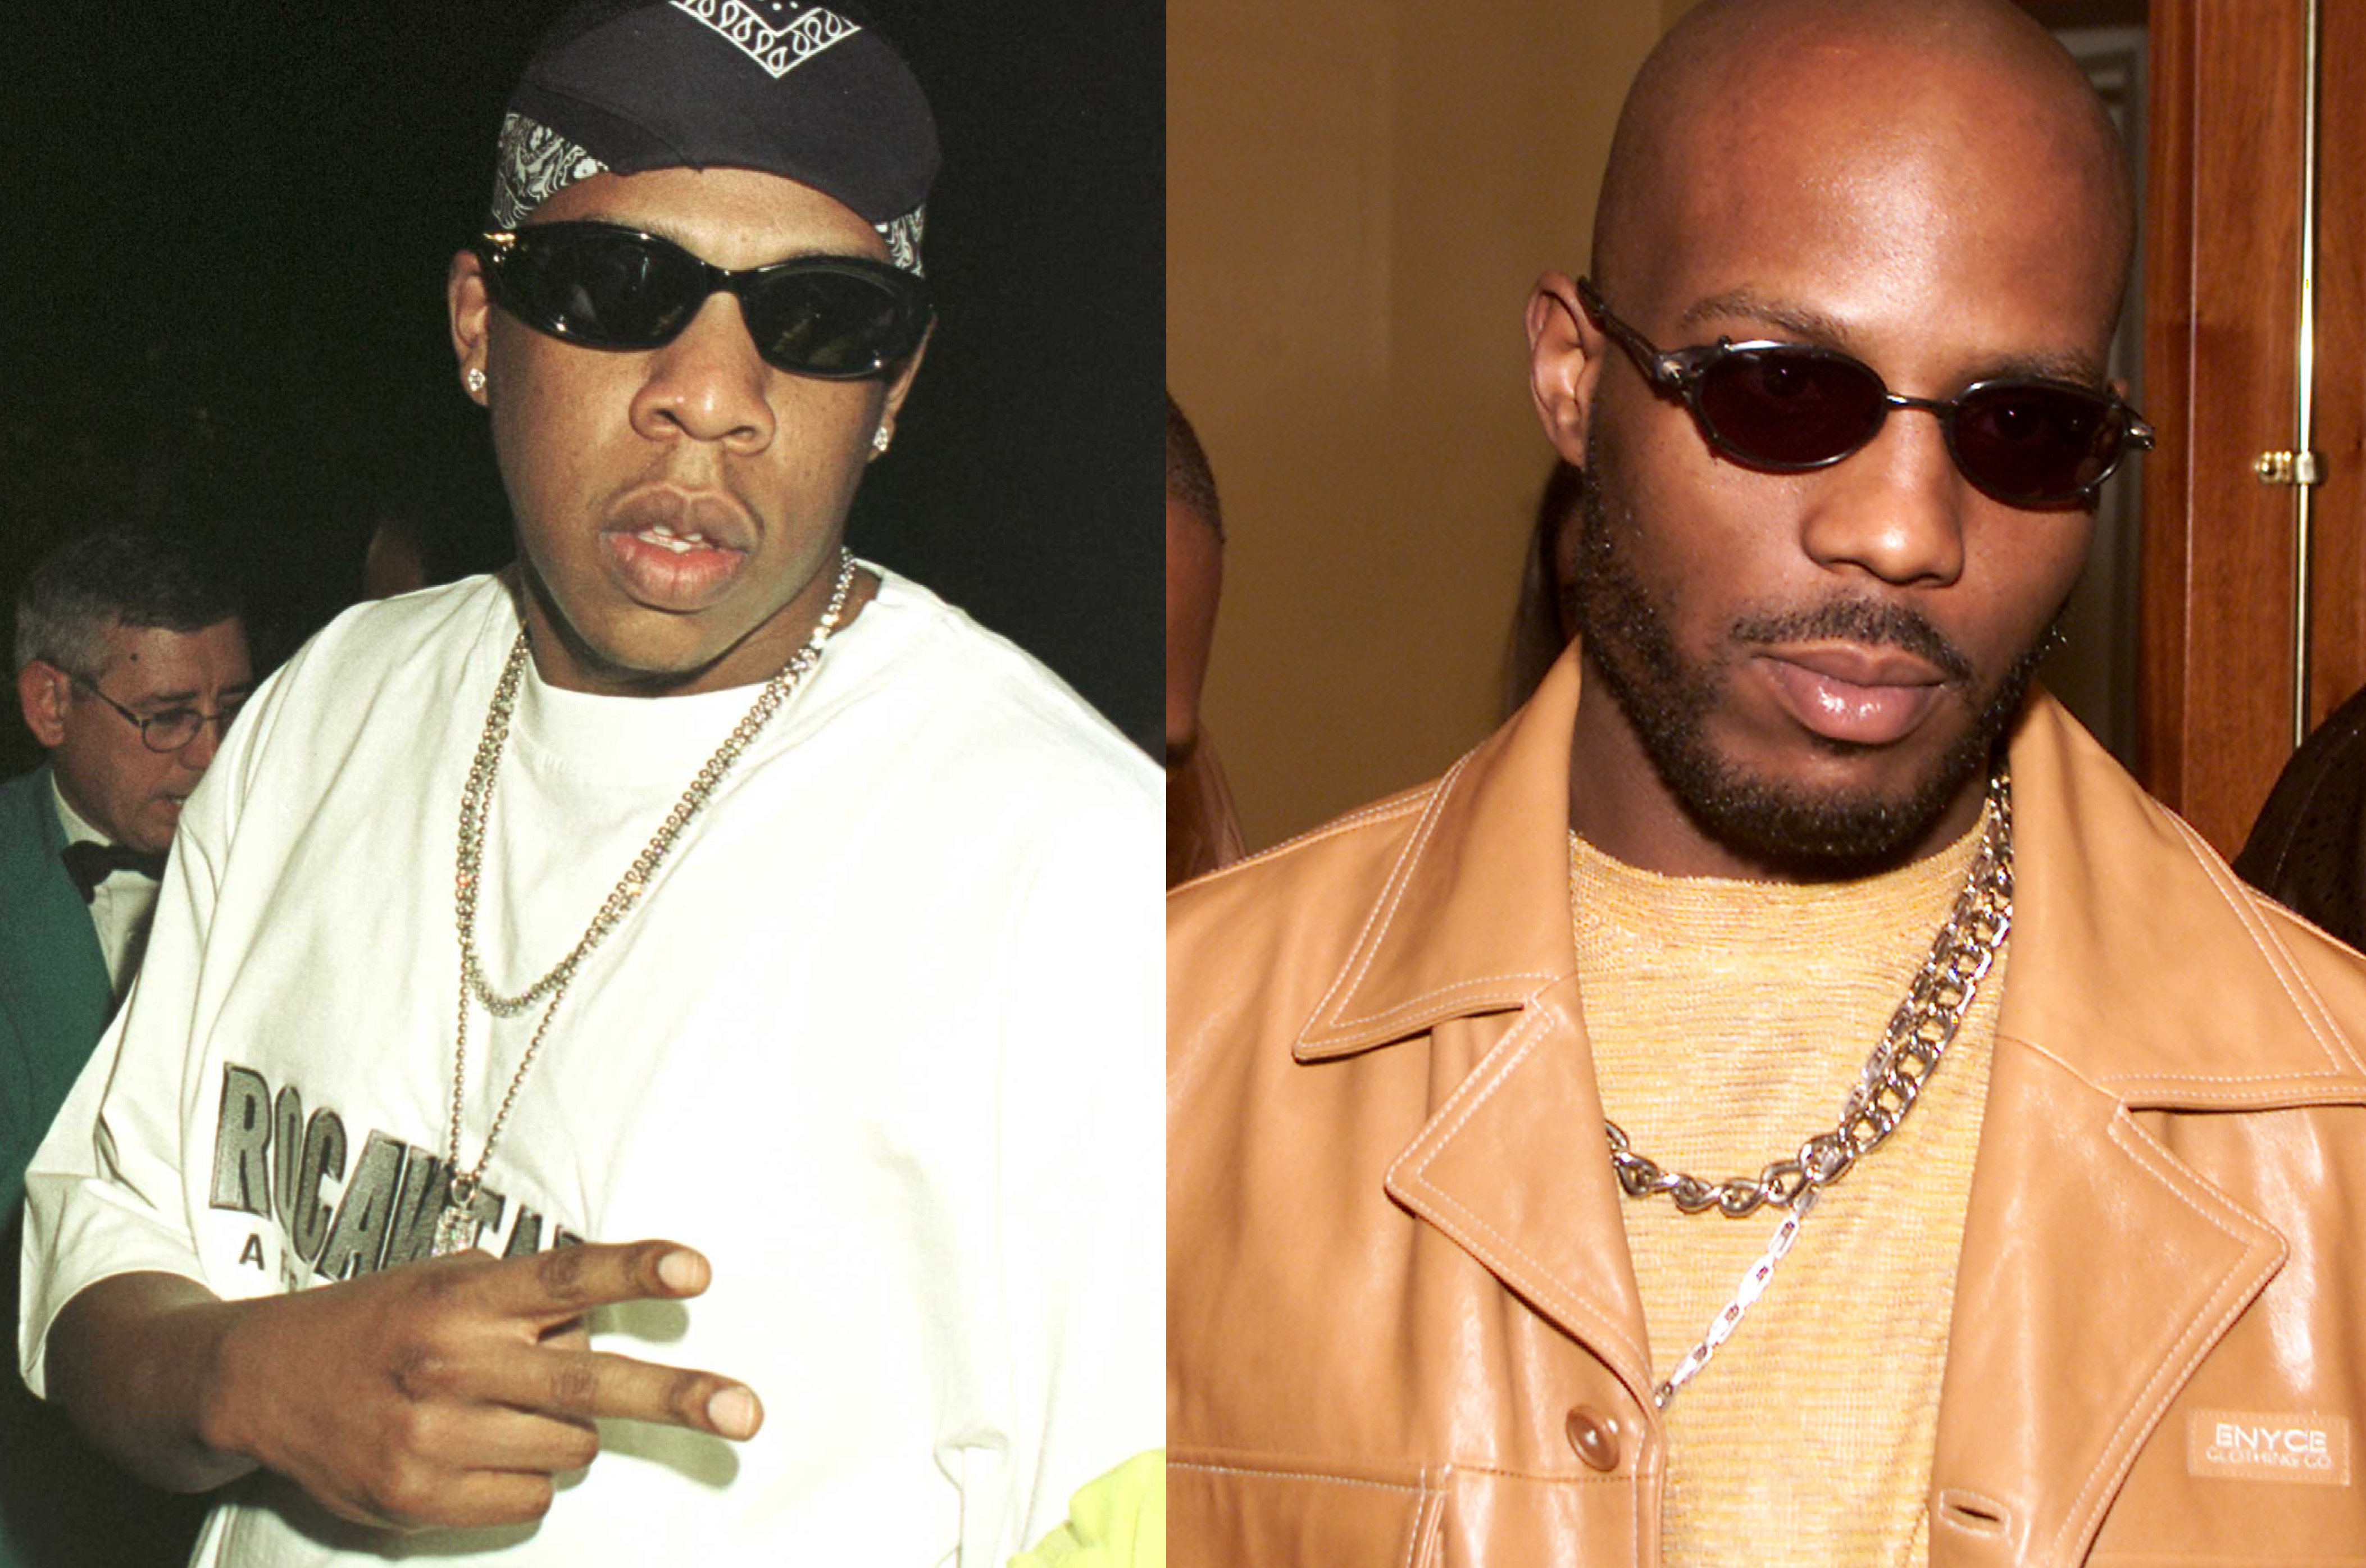 Jay-Z & DMX Past Beef Explained By Ruff Ryders Founders